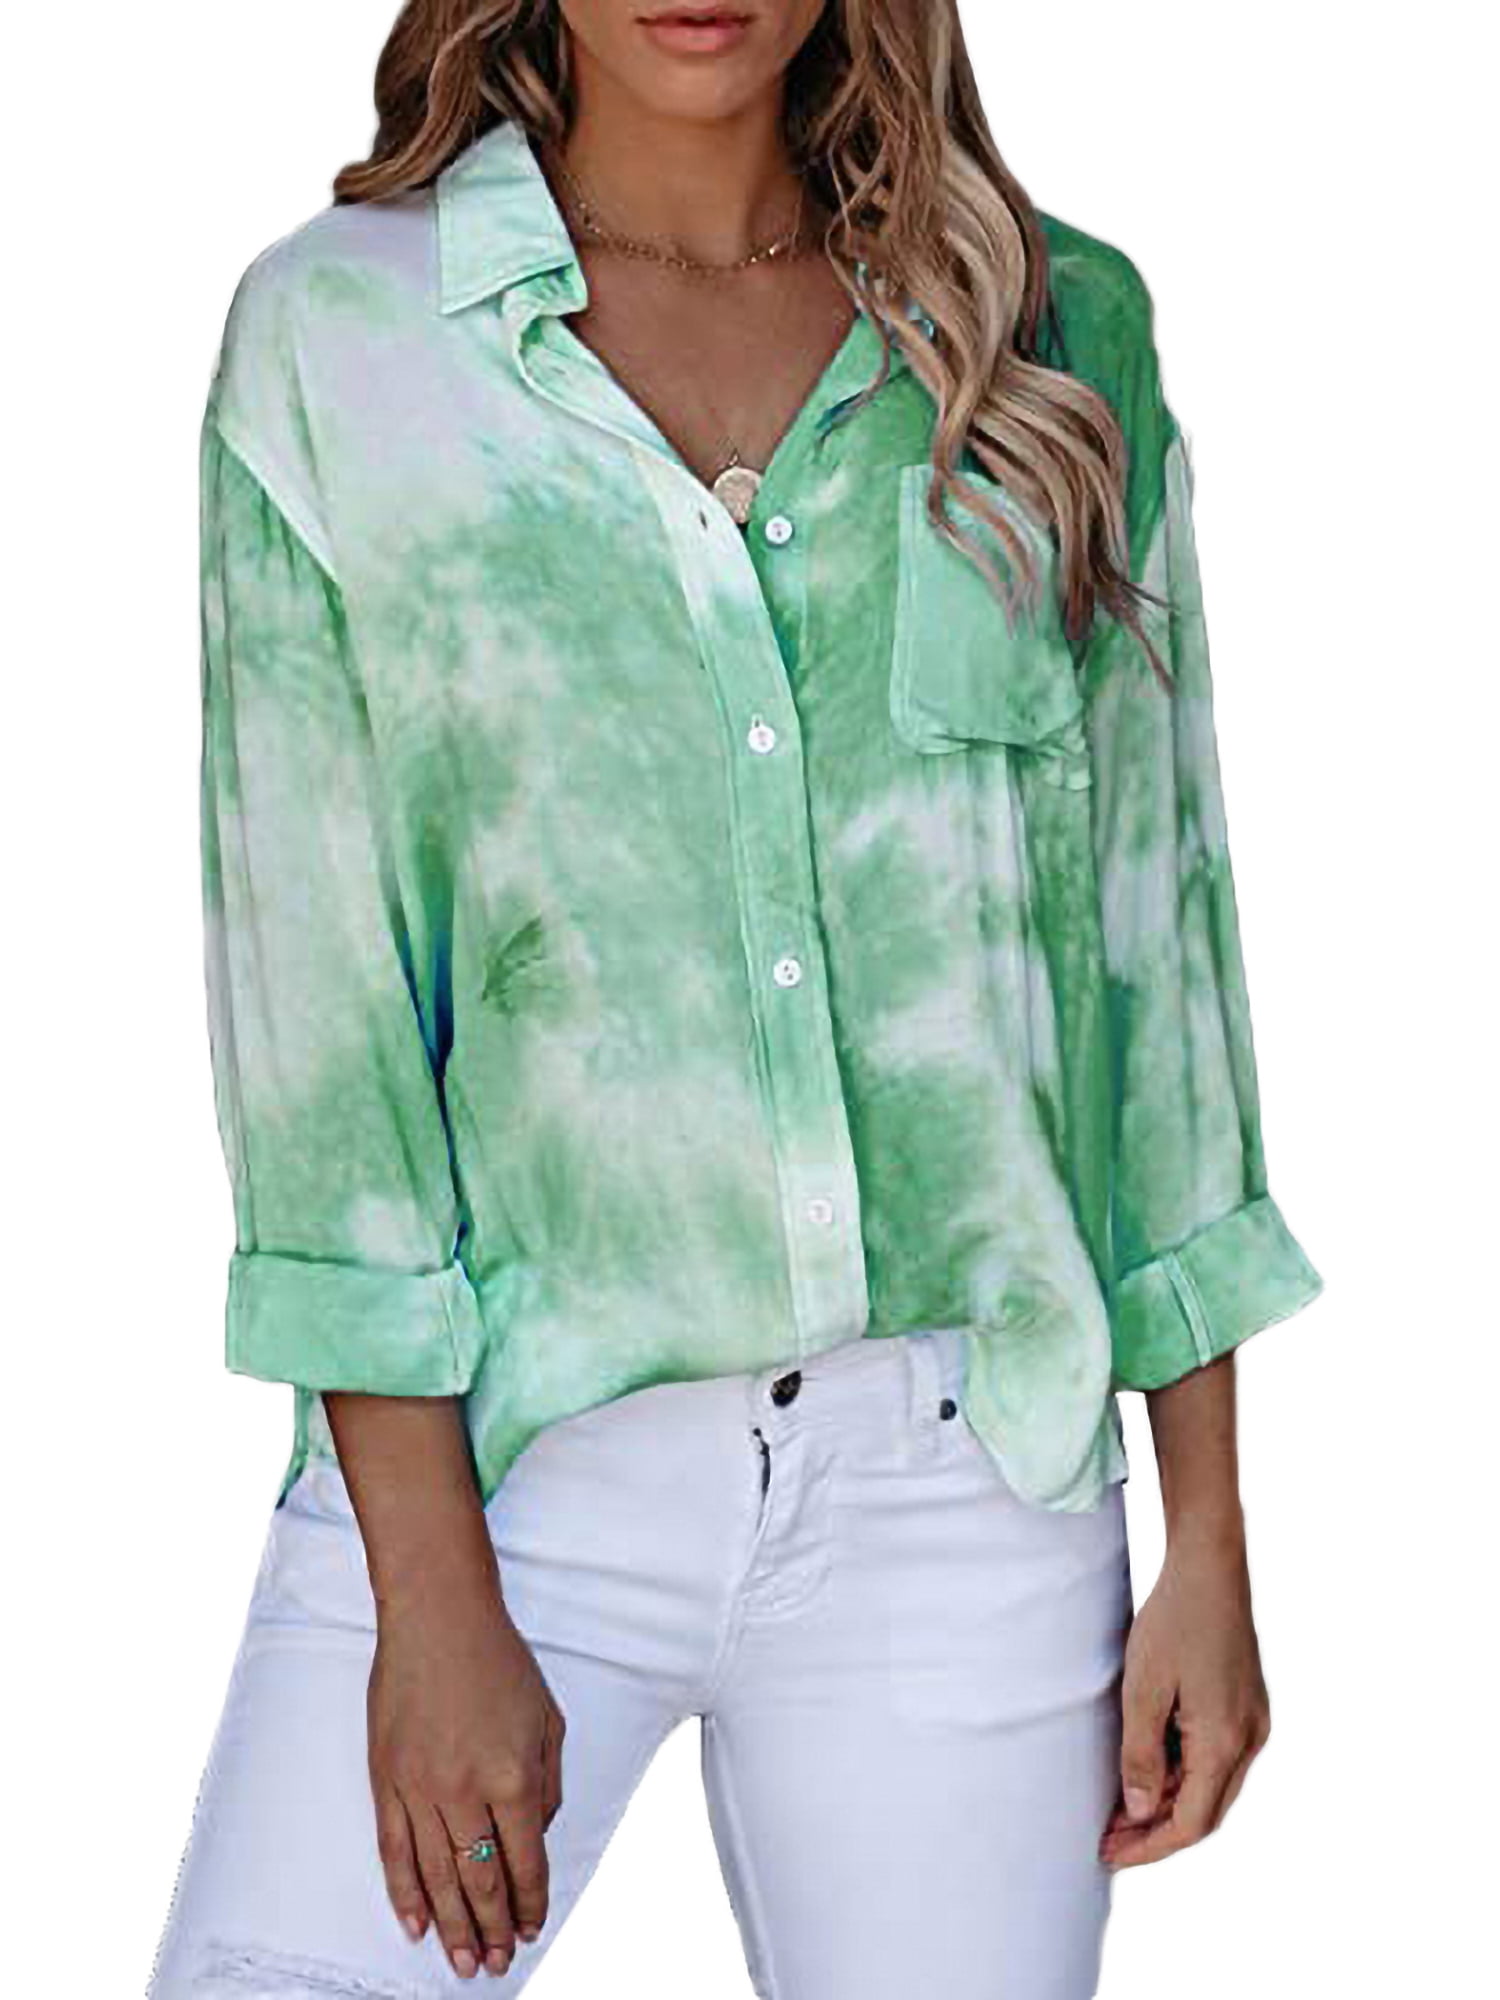 Womens Long Sleeve Tie Dyeing Gradient Tops Round Neck Loose Shirts Blouse with Pocket 